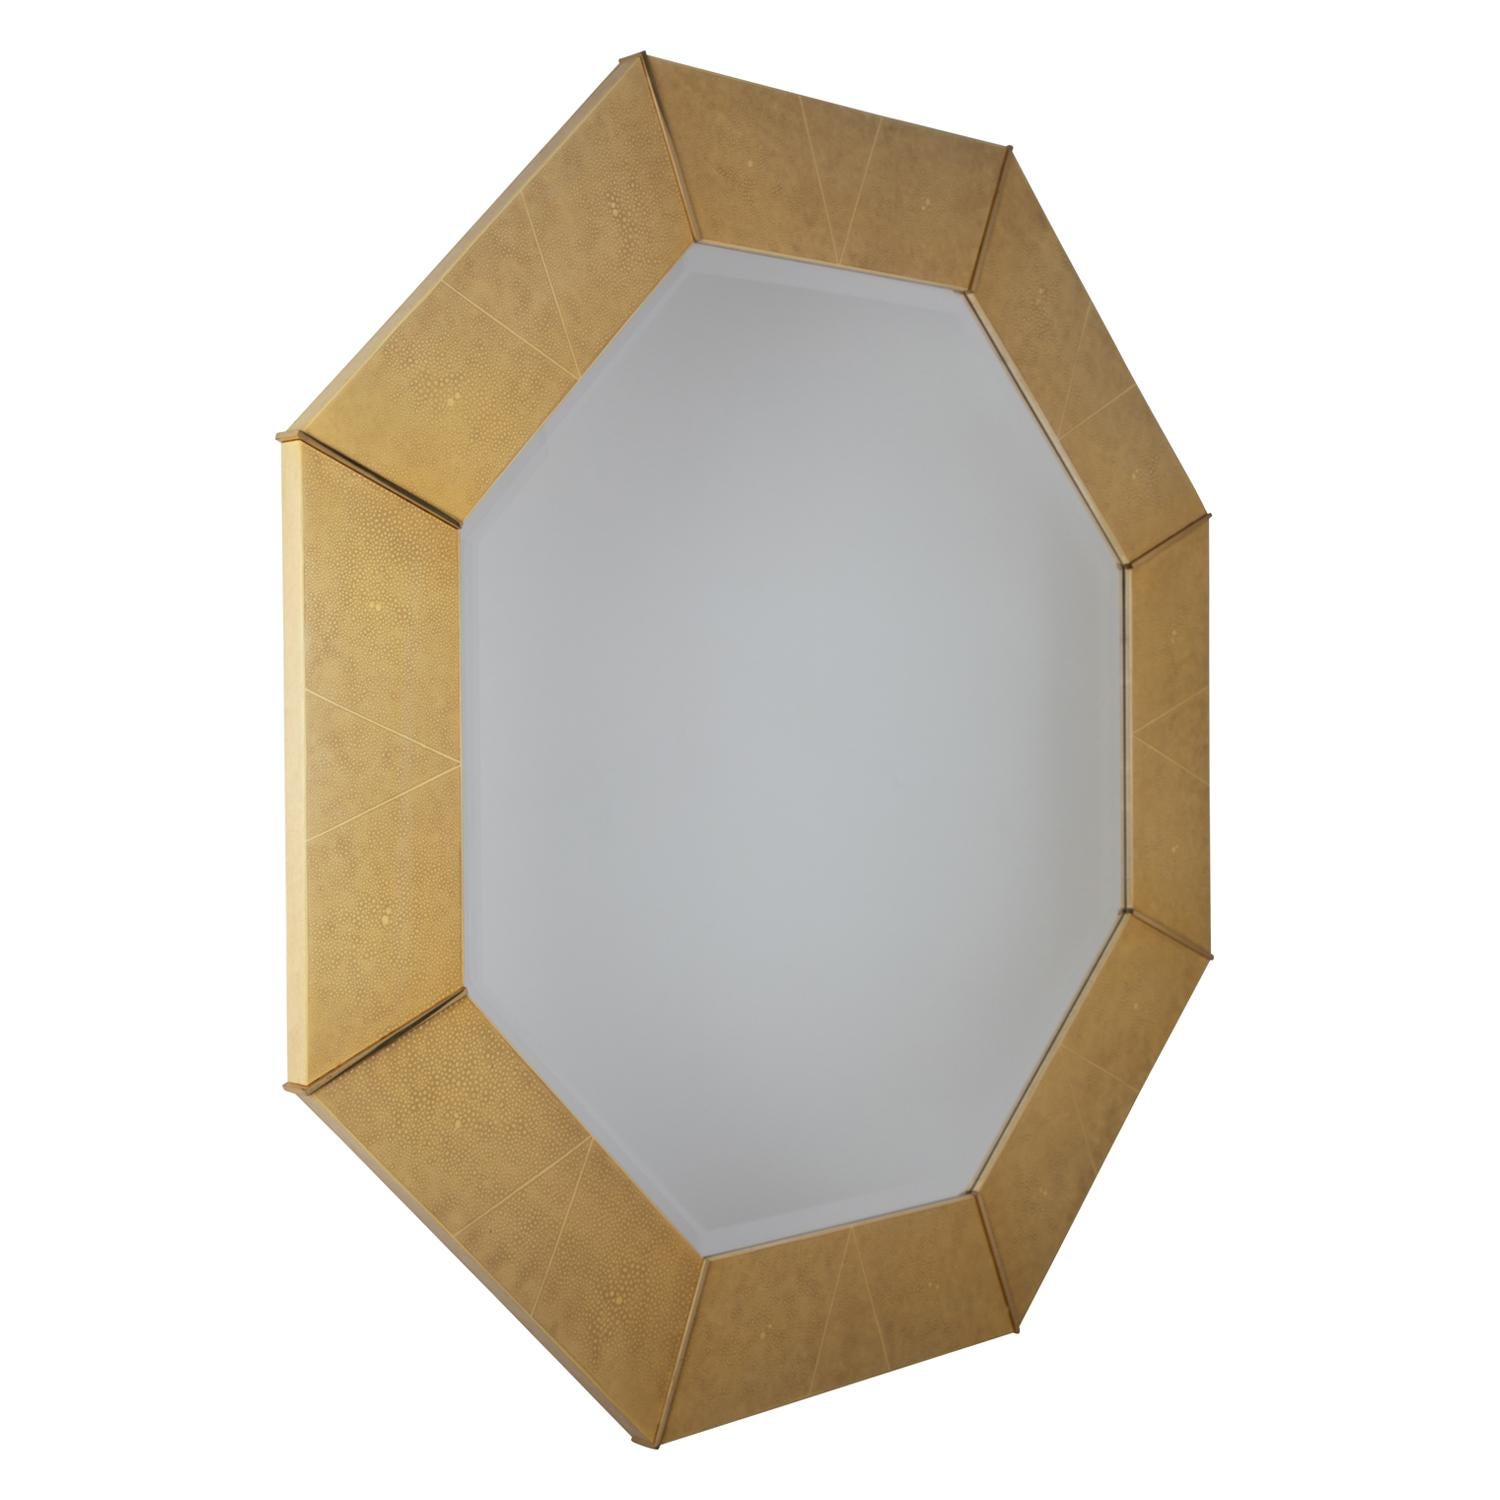 Exceptional wall hanging mirror, octagonal with artisan shagreen lacquer with brass accents, by Karl Springer, American 1980's. Mirror is beveled.

Reference:
Karl Springer LTD paper catalog published in the 1970’s shows an image of this model on